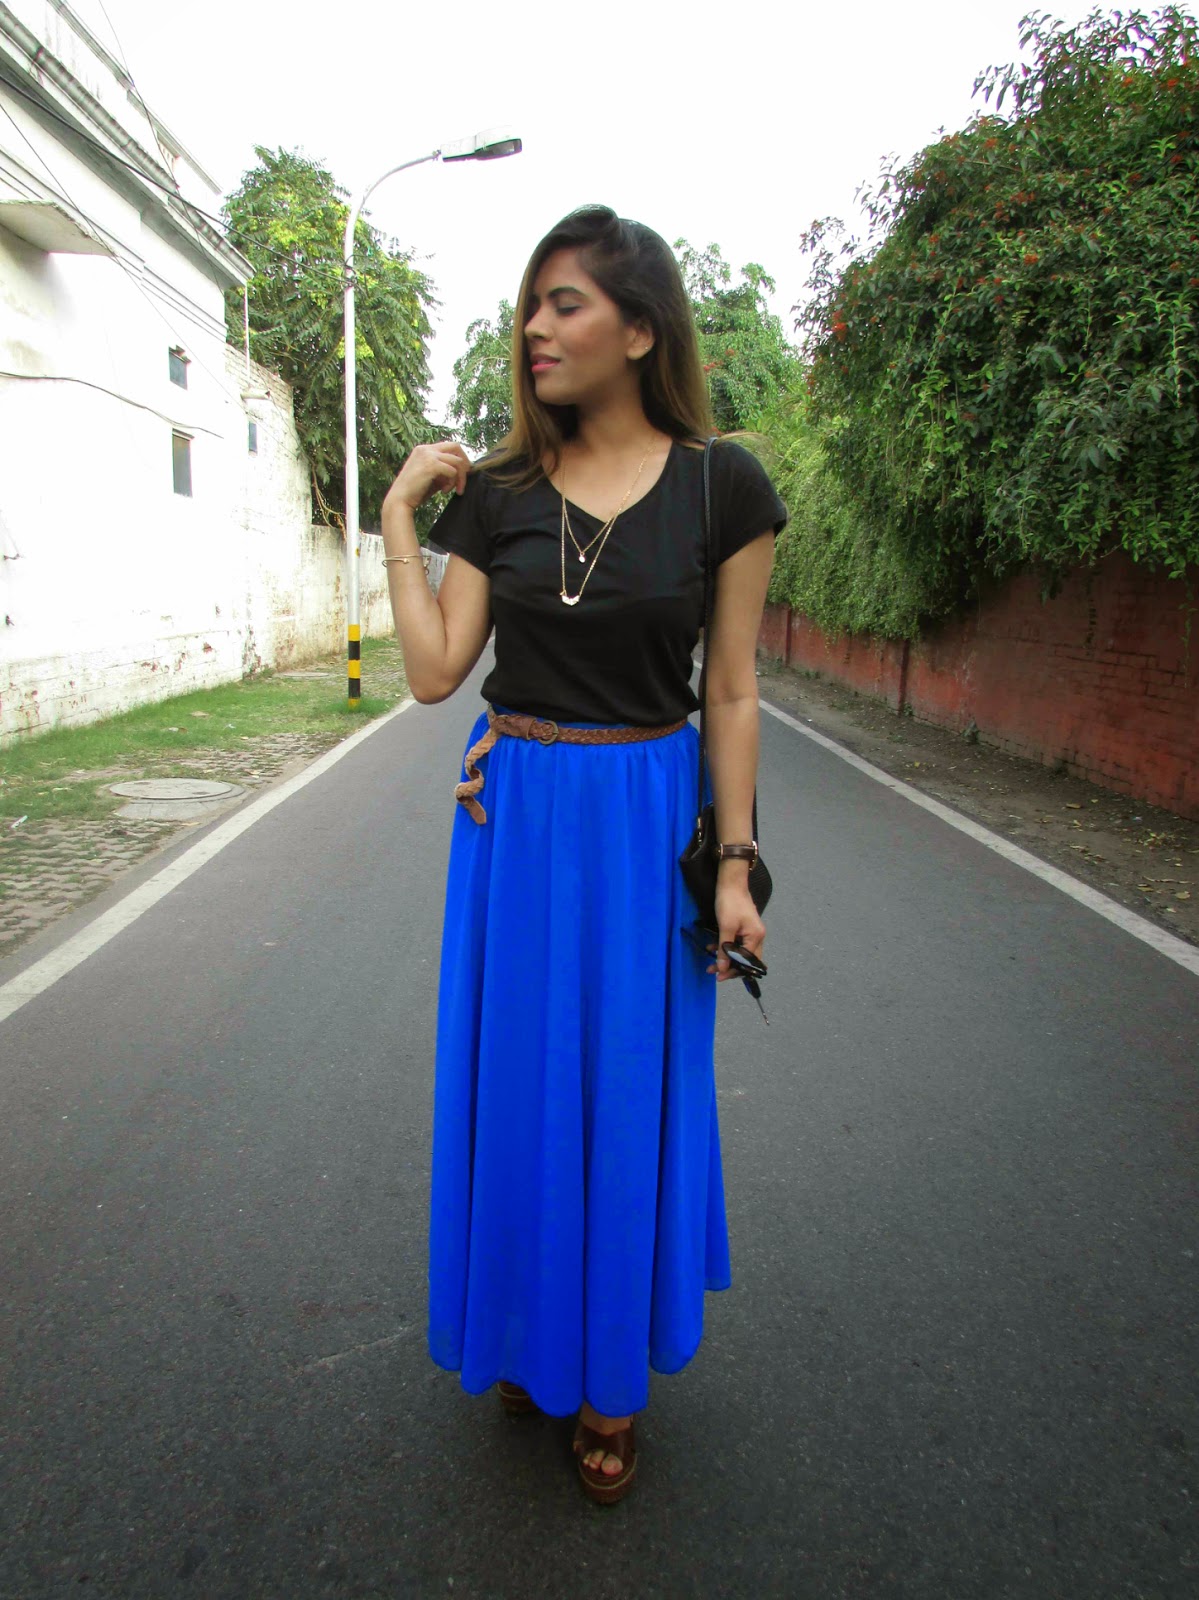   How to style maxi skirt, summer trends 2915, Indian fashion blogger, retro style, cheap maxi skirt online, popbasic, double string necklace, retro outfit, fashion, popbasic review, maxi skirt simple tshirt, maxi skirt of petites, how to look tall in maxi skirt, ombre haie, best hair color for summers, summer hair, maxi skirt for short people, blue maxi skirt, summer jewelry trends 2015, spring fashion trends 2015, beauty , fashion,beauty and fashion,beauty blog, fashion blog , indian beauty blog,indian fashion blog, beauty and fashion blog, indian beauty and fashion blog, indian bloggers, indian beauty bloggers, indian fashion bloggers,indian bloggers online, top 10 indian bloggers, top indian bloggers,top 10 fashion bloggers, indian bloggers on blogspot,home remedies, how to